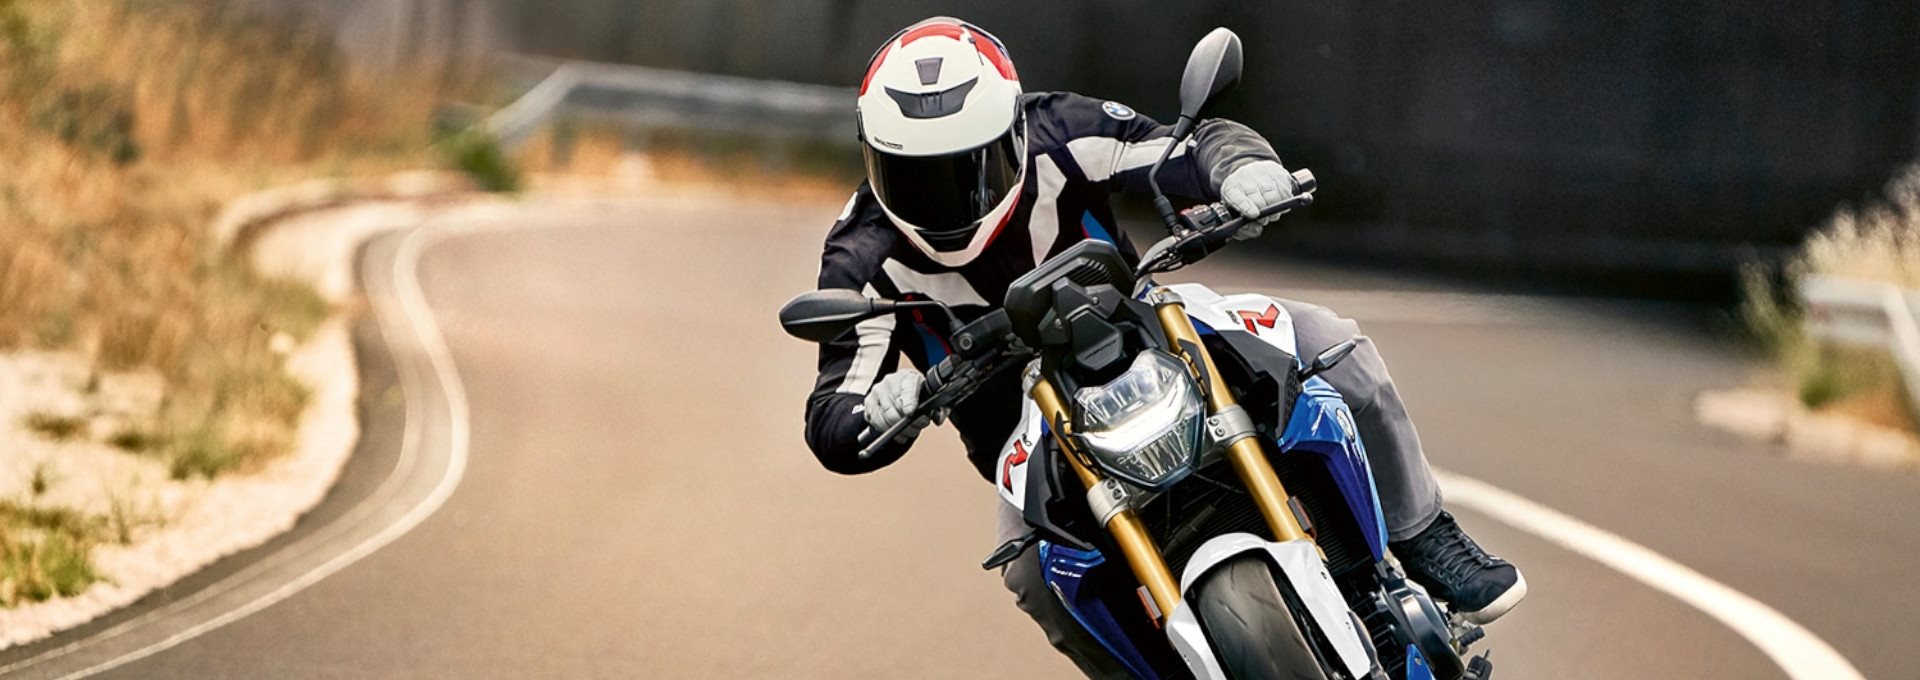 GET A NEW BMW F 900 R FROM JUST 99 990 SEK*

